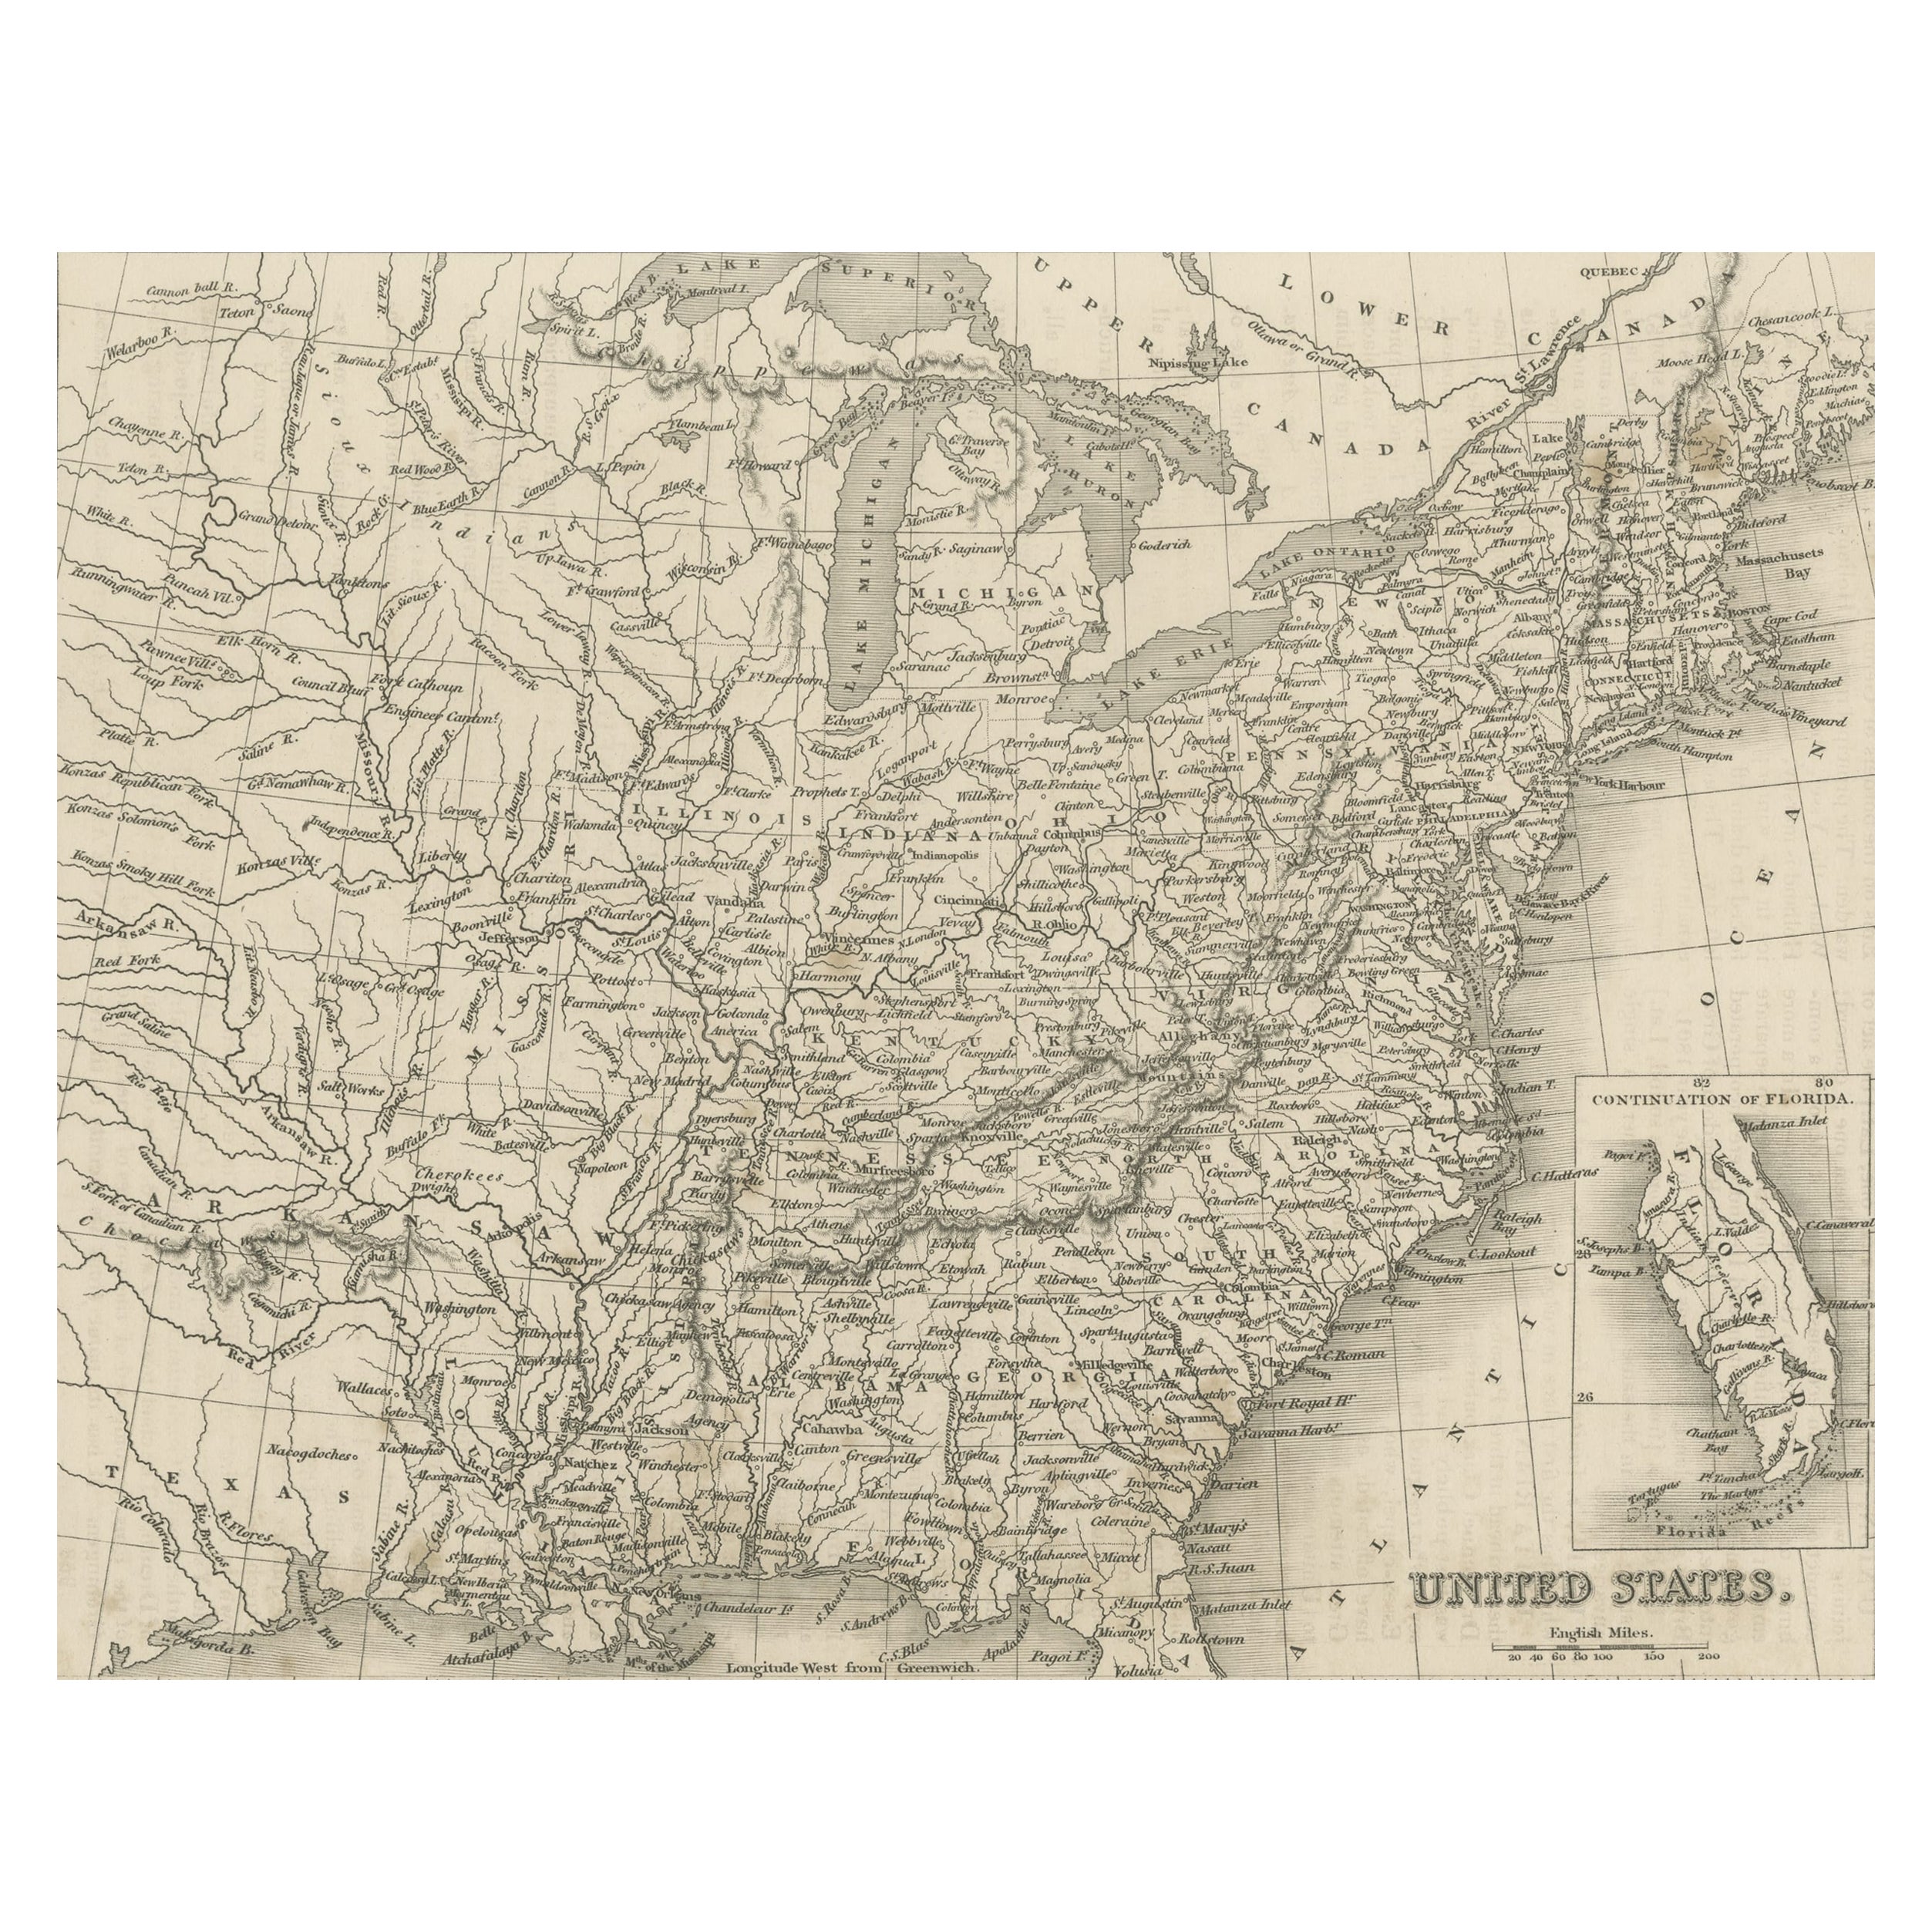 Steel Engraved Map of the United States with Inset Map of Florida